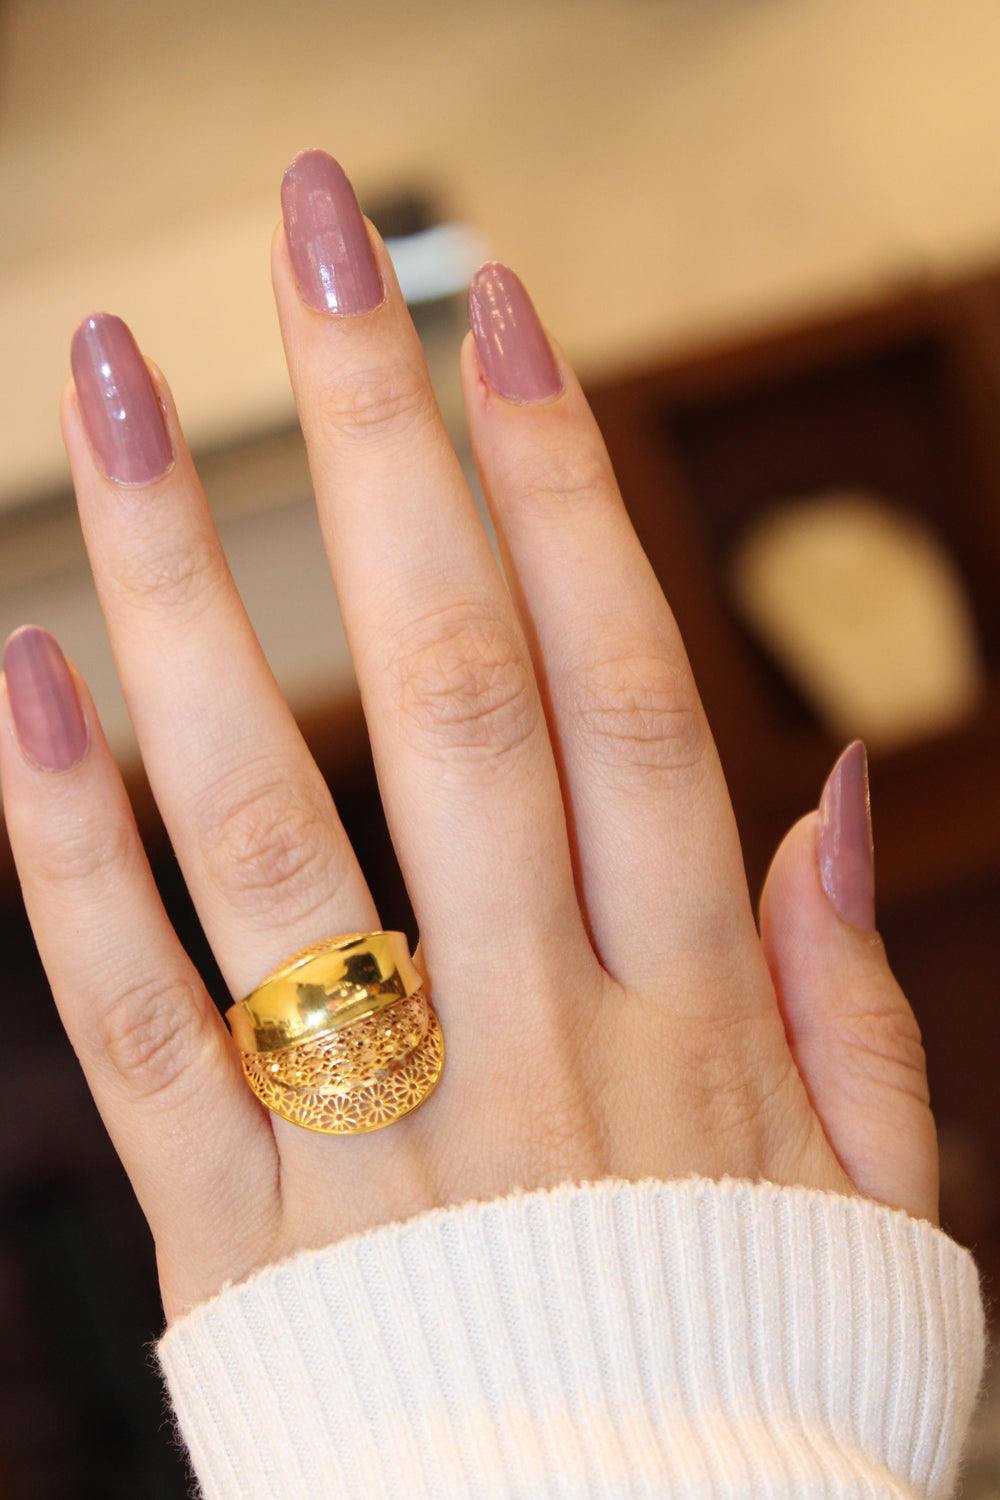 21K Turkish Ring Made of 21K Yellow Gold by Saeed Jewelry-18870